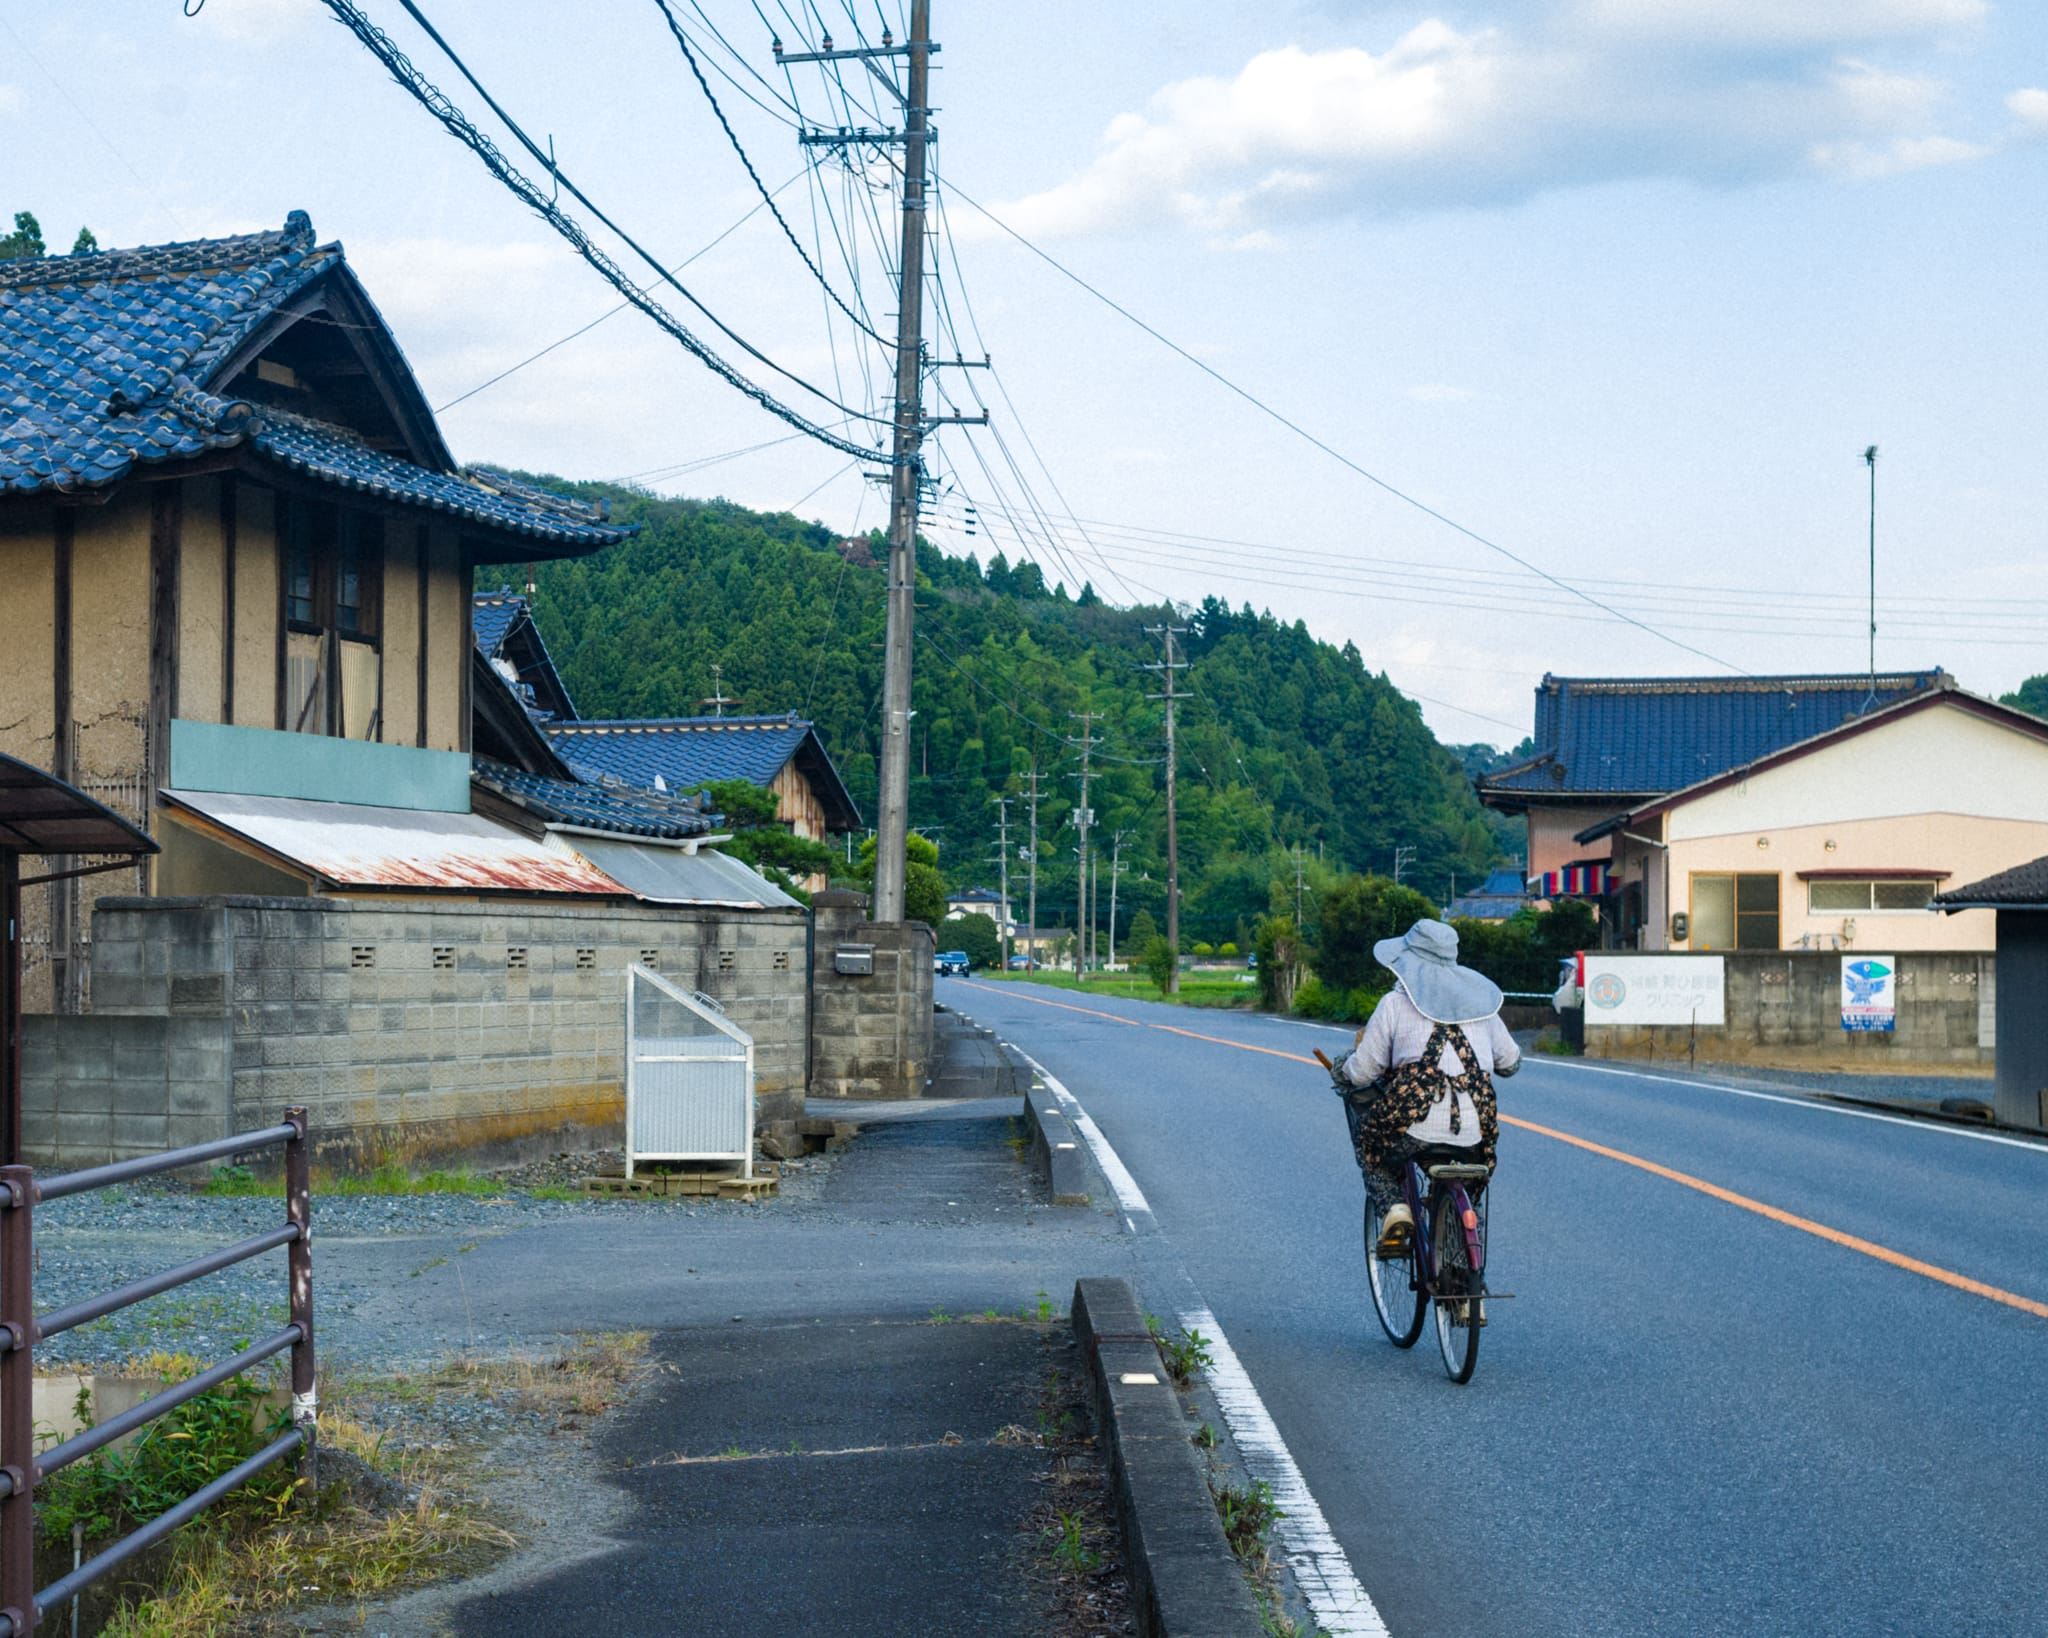 Cyclist enjoying a serene ride on a traditional Japanese rural street.